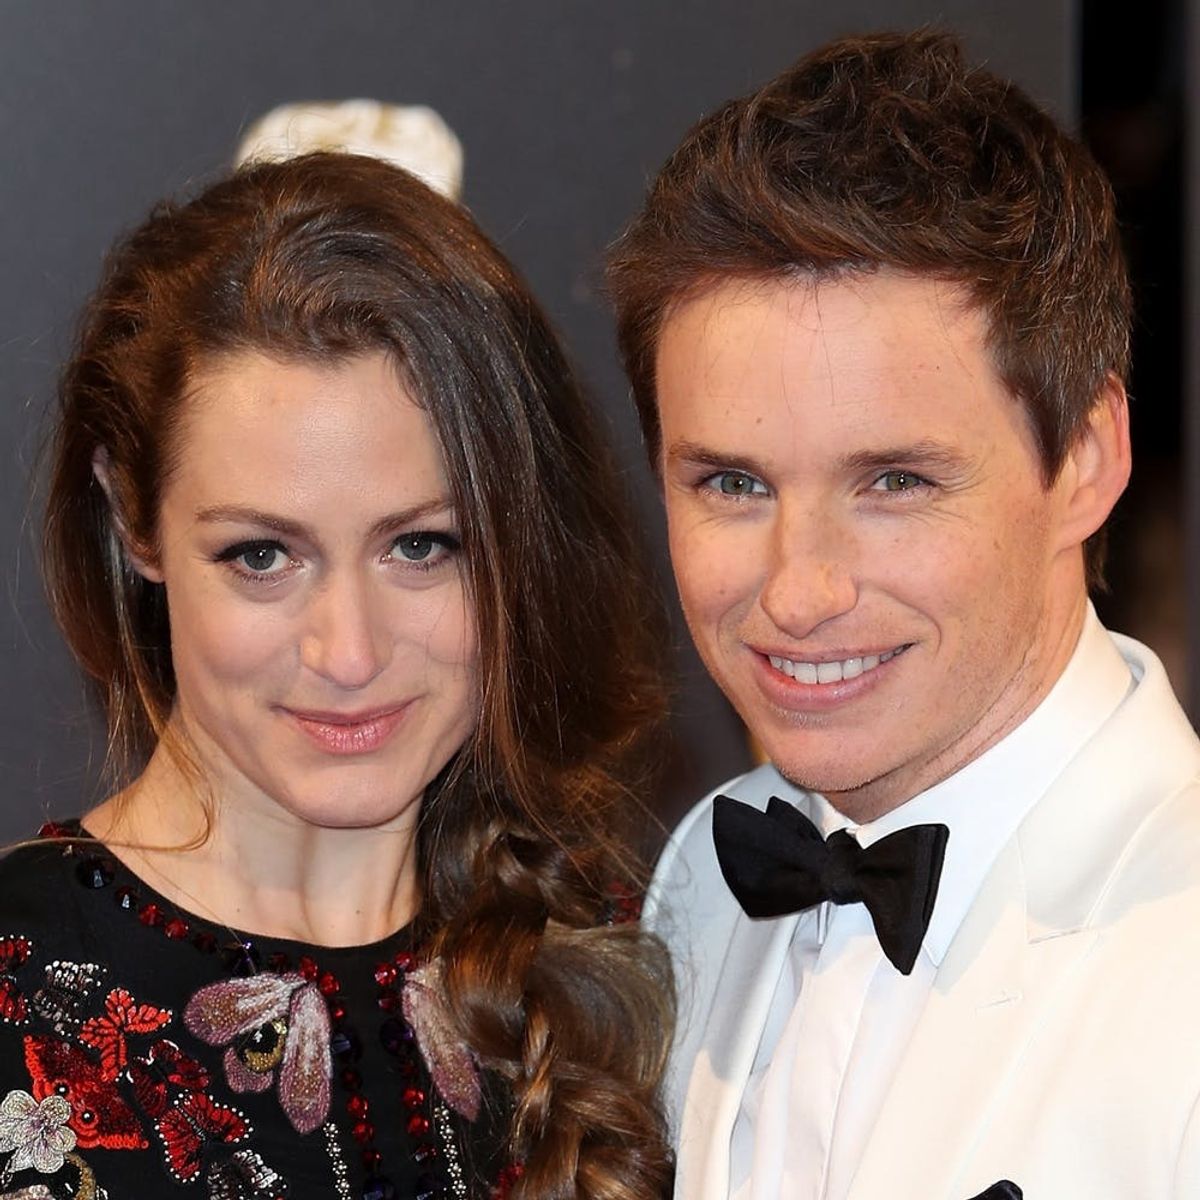 Eddie Redmayne and Hannah Bagshawe Have Welcomed a Son With the Most Timeless Name